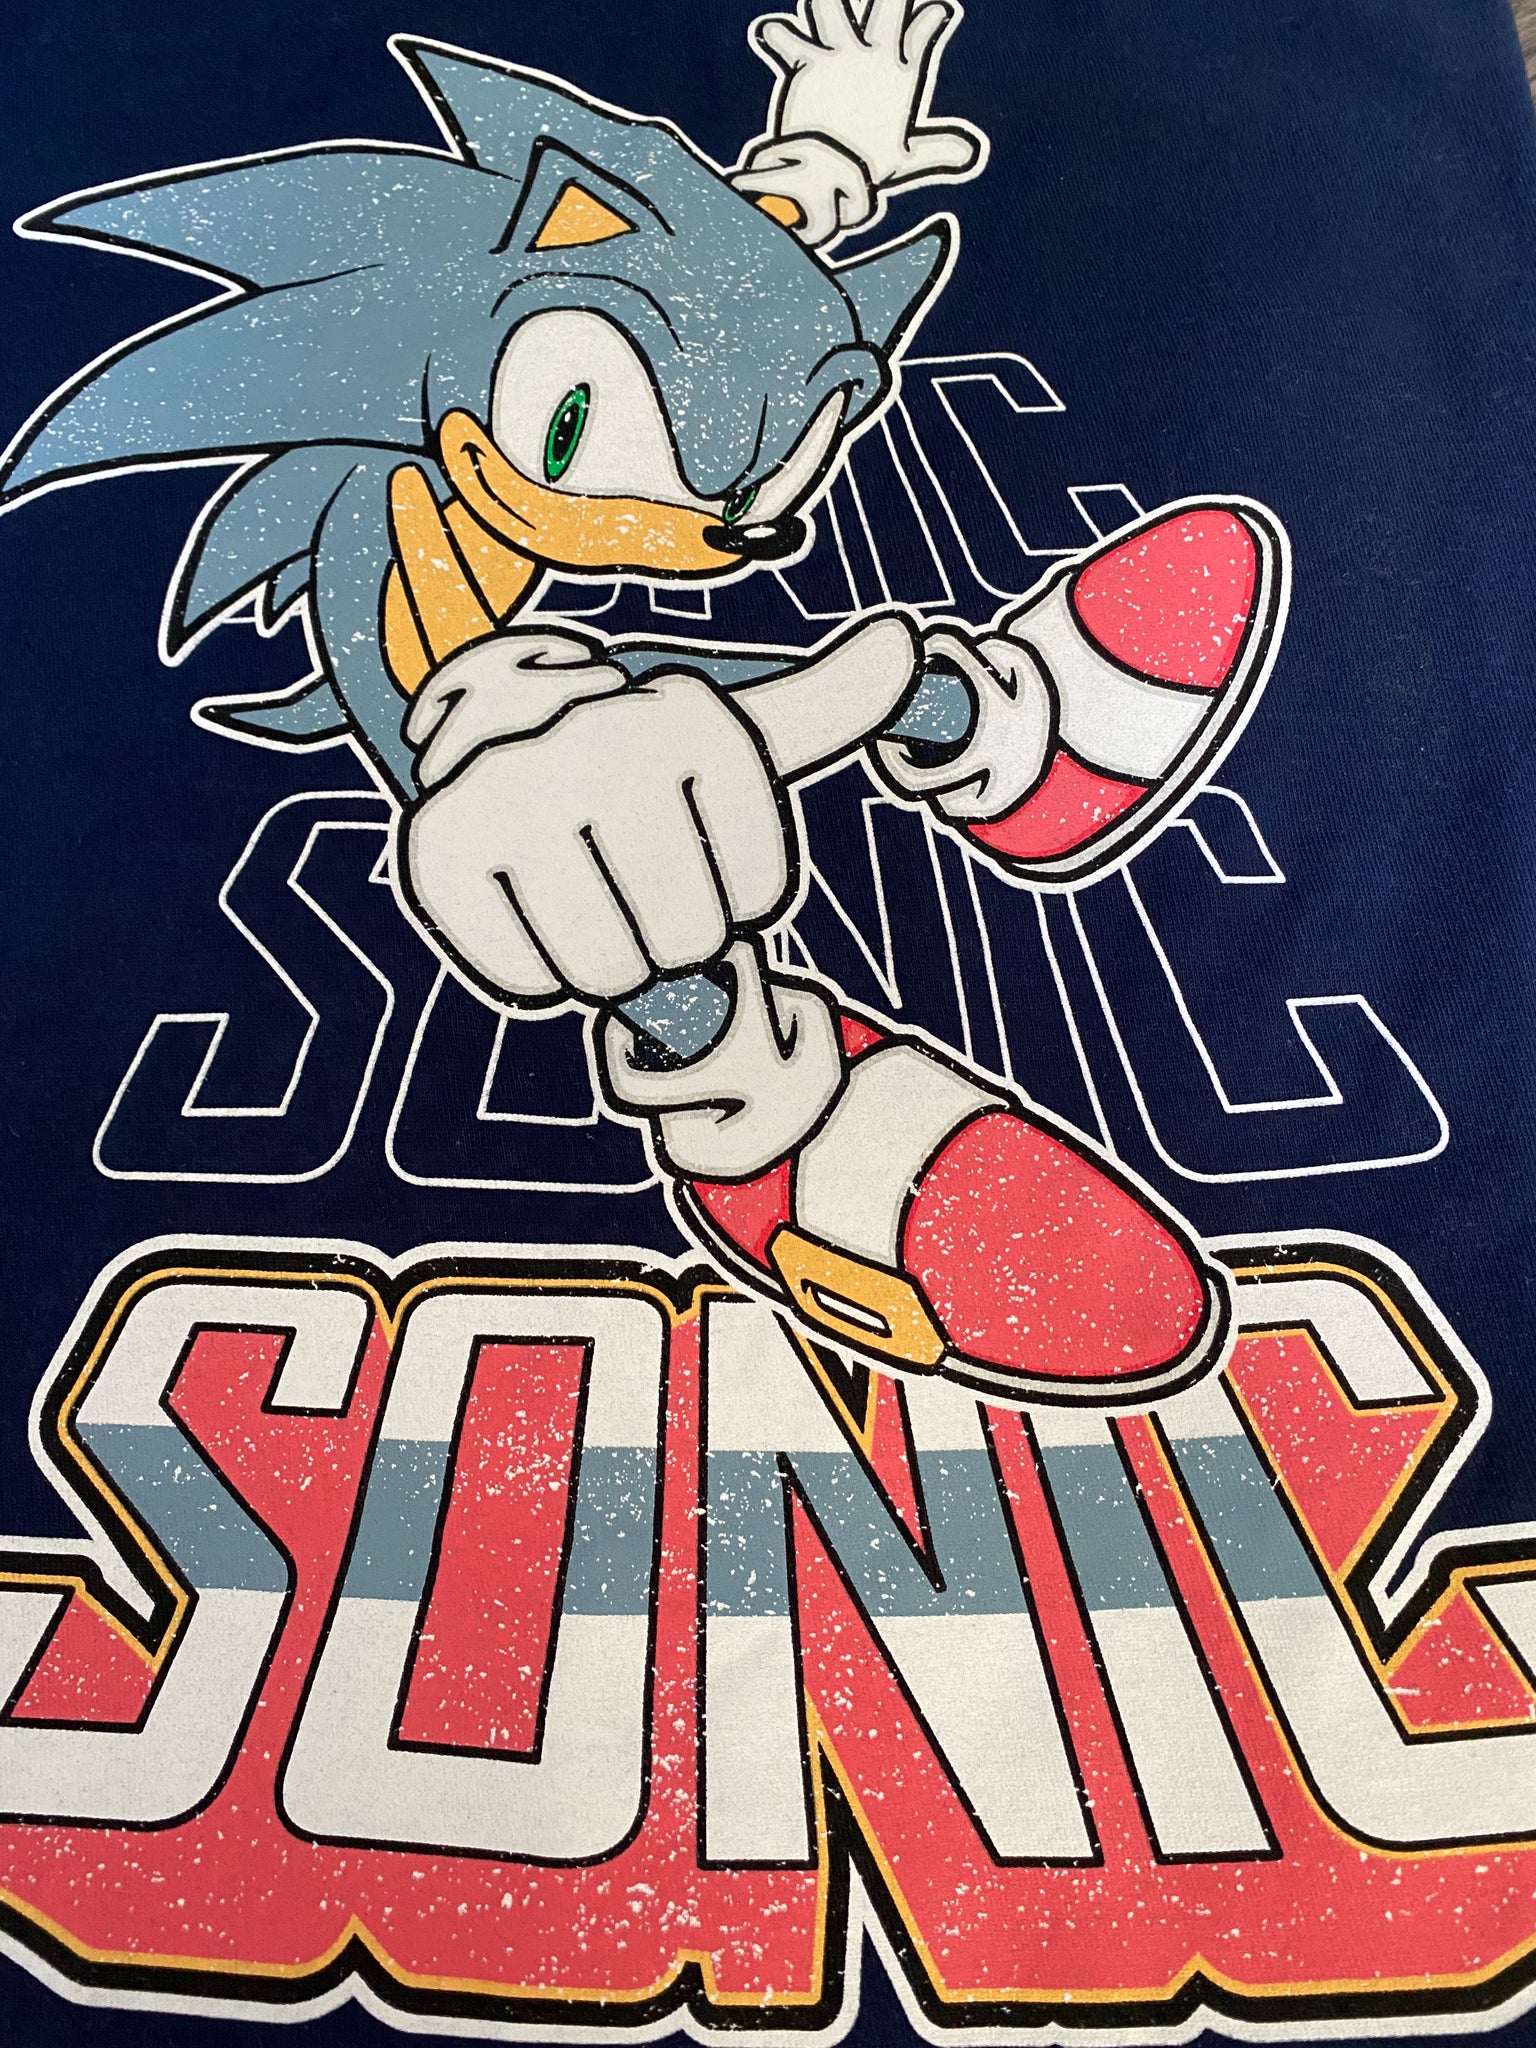 Sonic Up cycle Cozy shirt